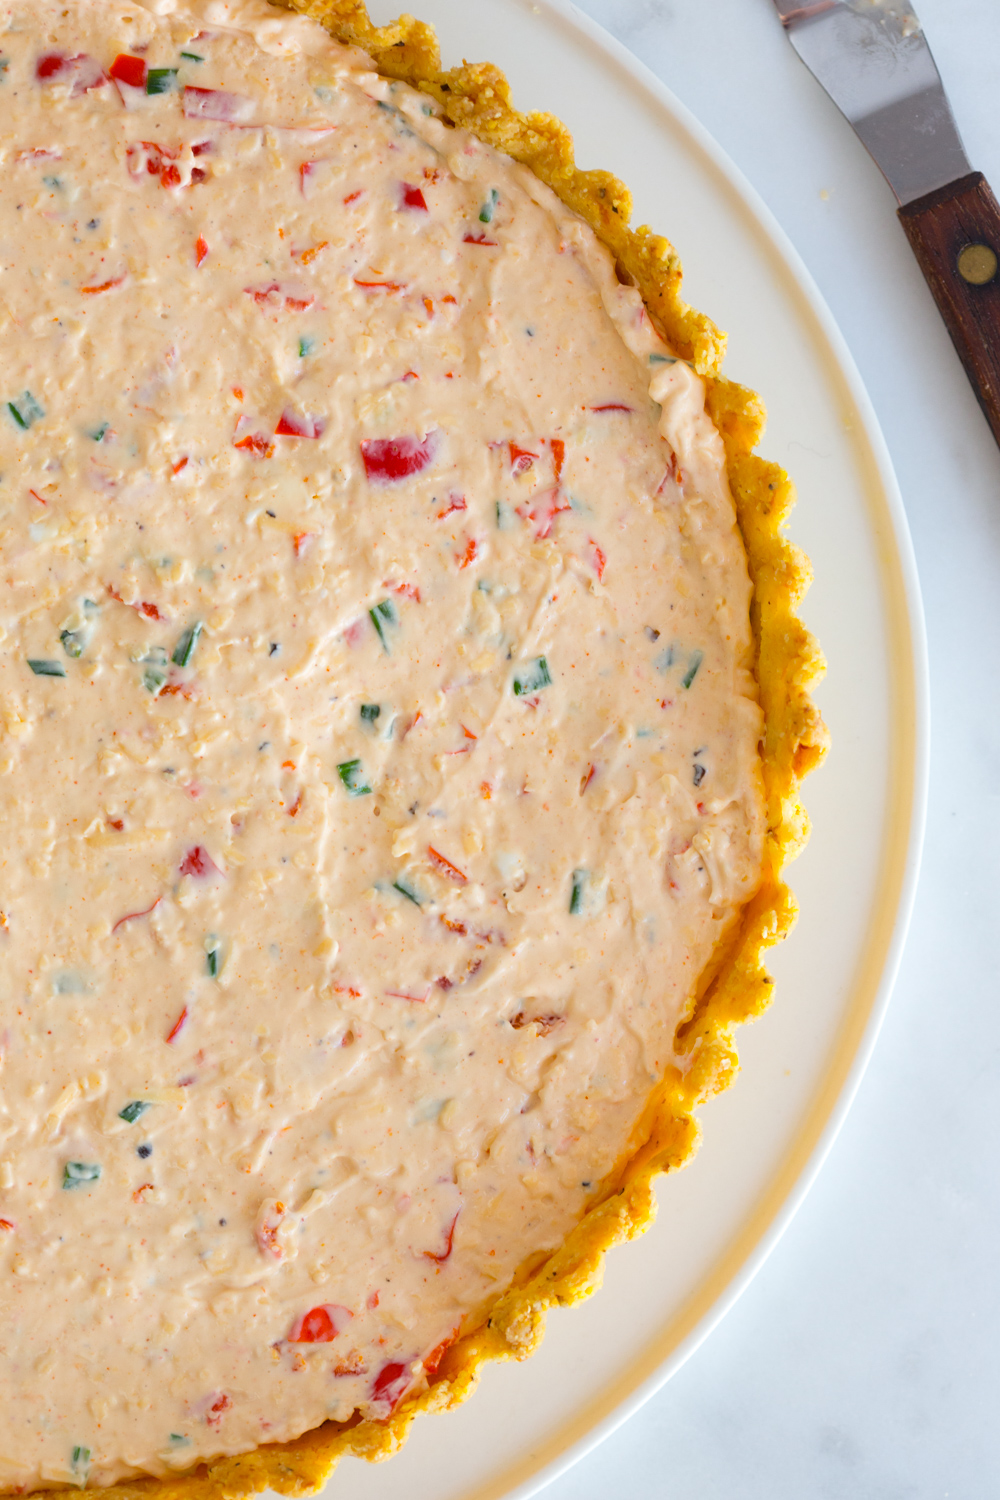 Filling the Heirloom Tomato and Pimento Cheese Tart with Cornmeal Crust